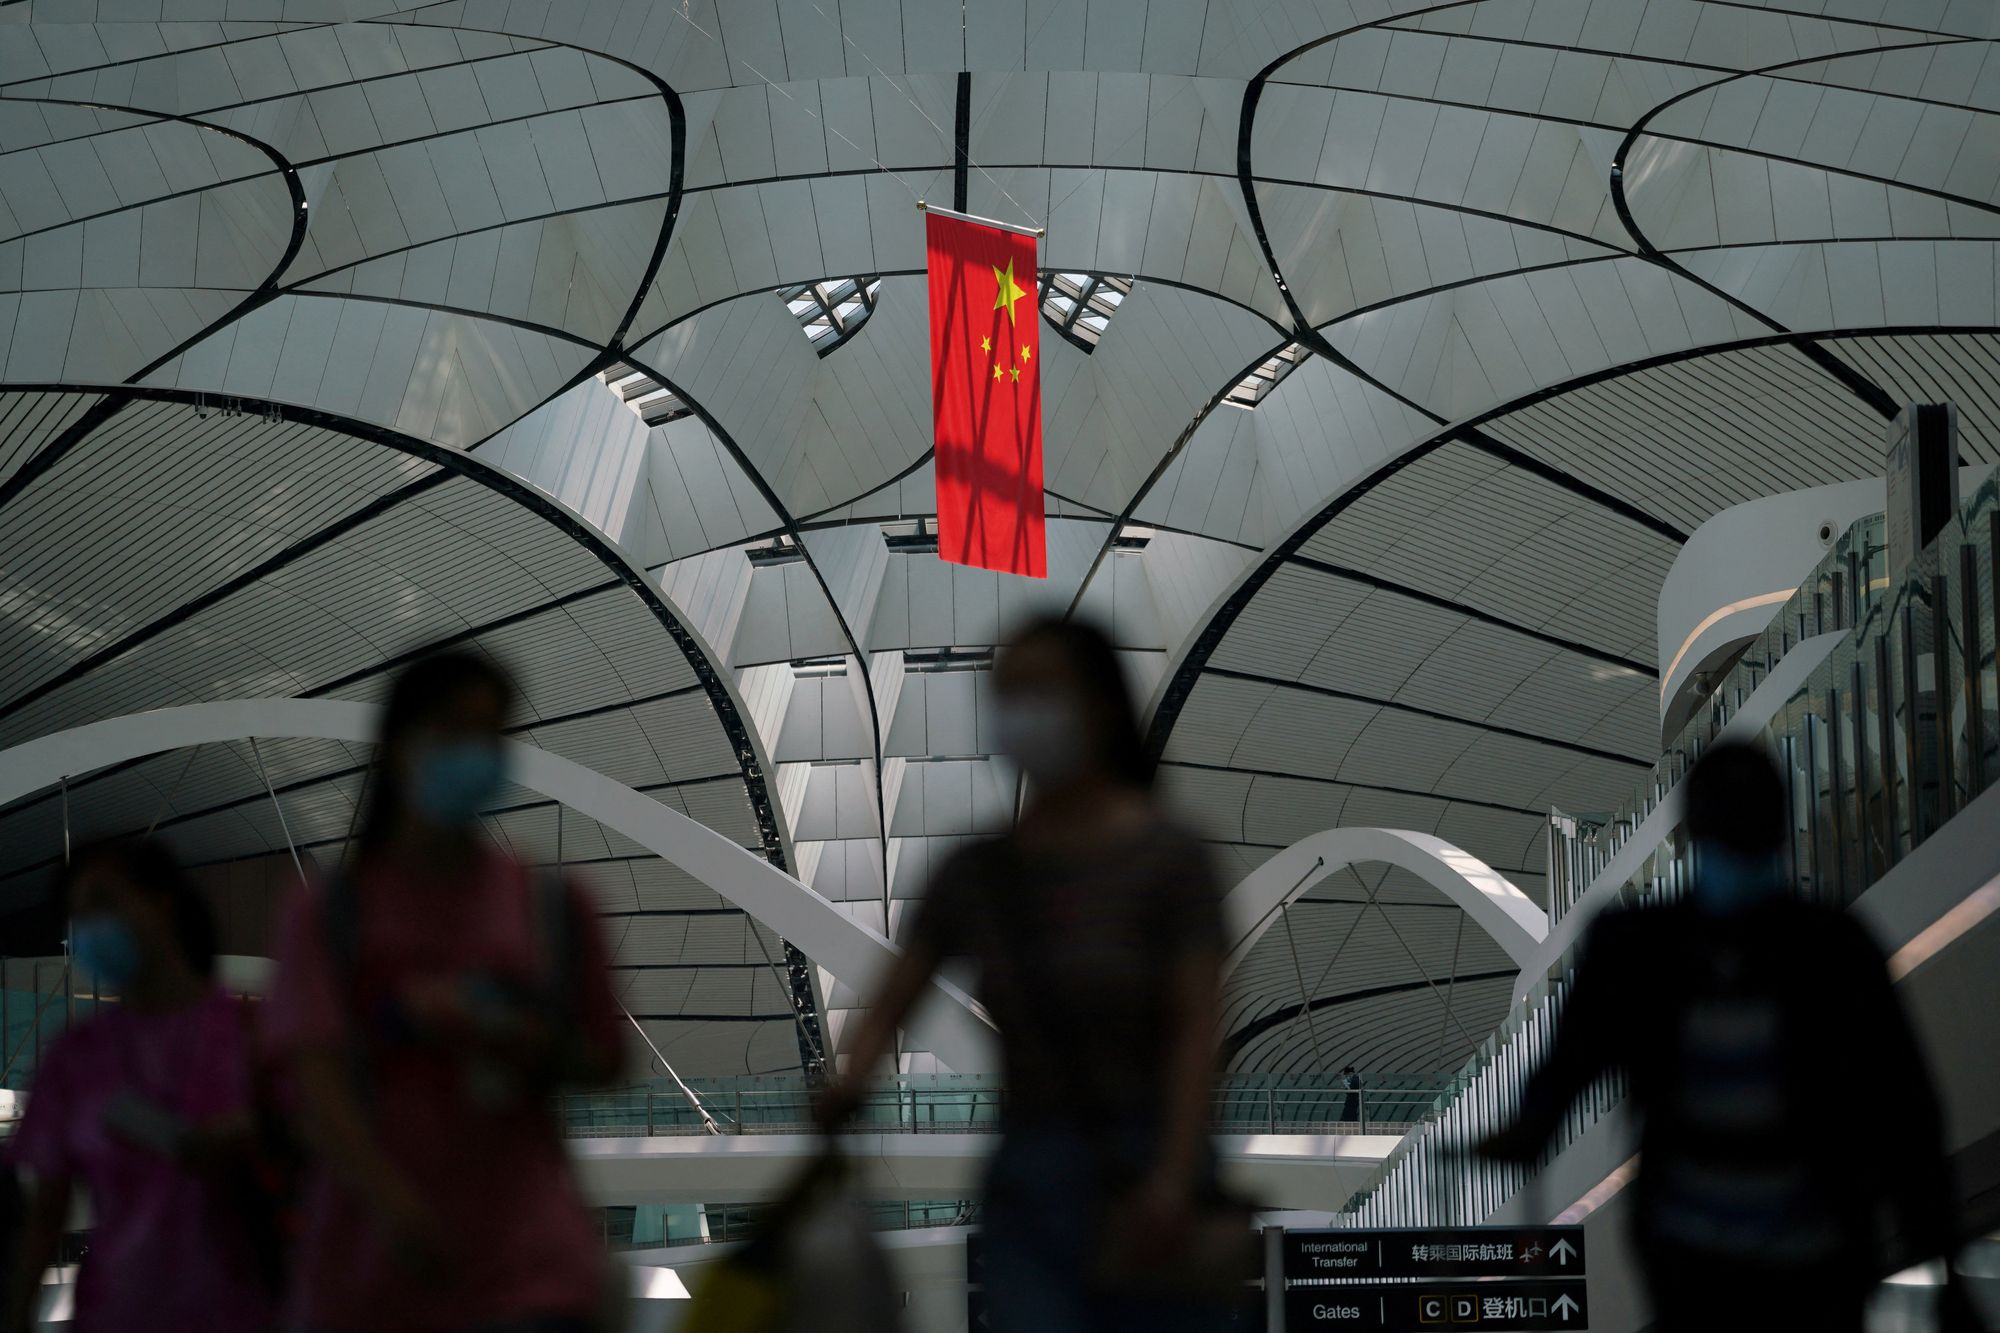 China has been bailing out developing countries with more loans